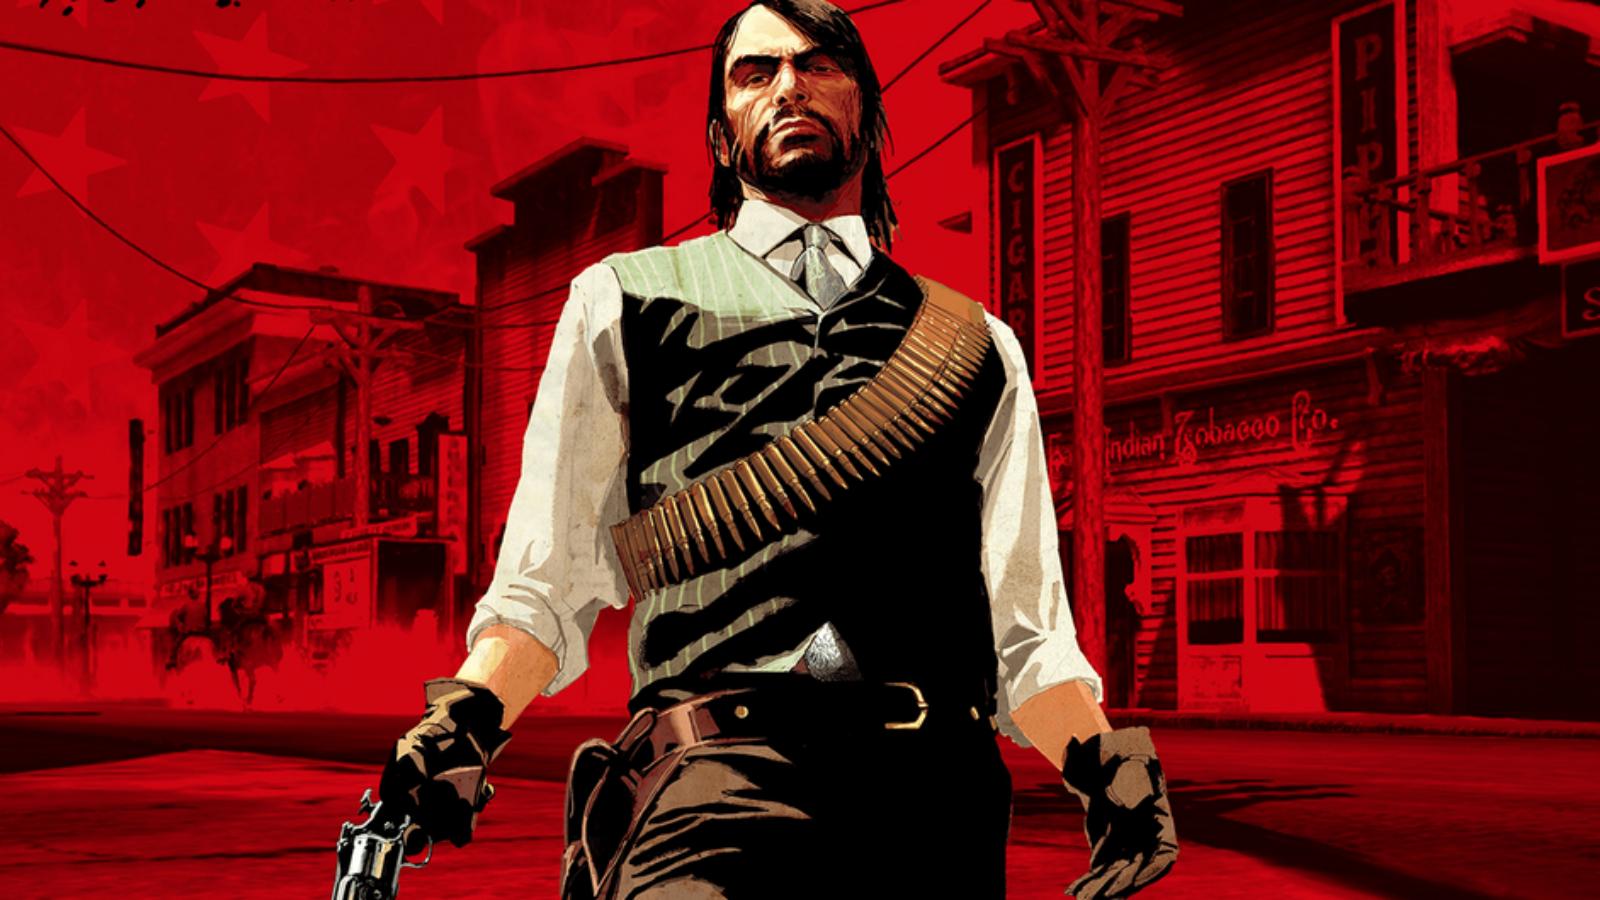 Did You Buy Red Dead Redemption's PS4 Port?